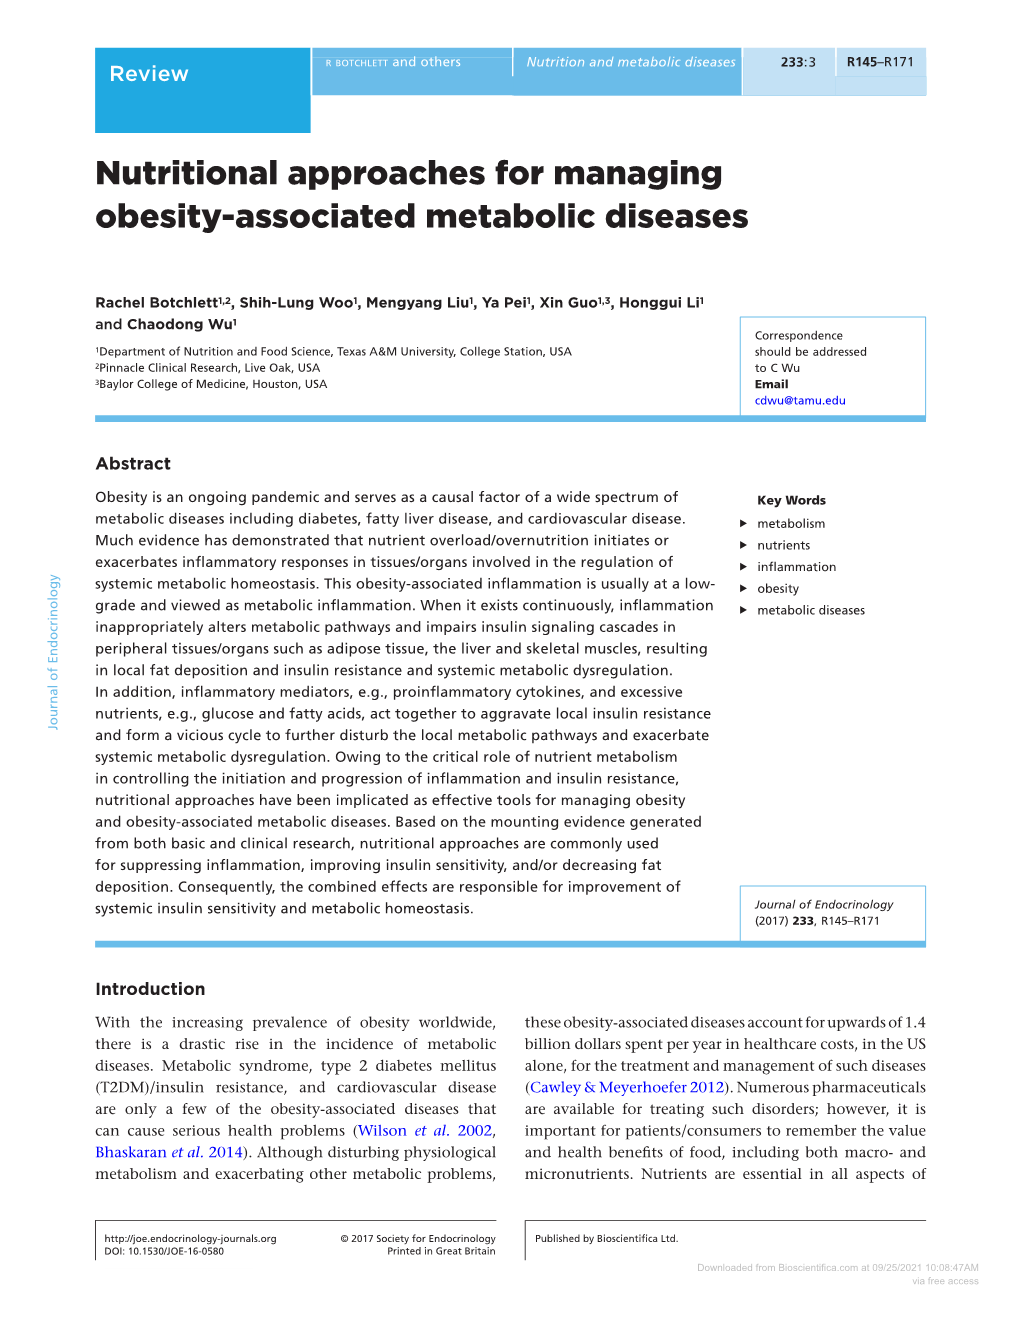 Nutritional Approaches for Managing Obesity-Associated Metabolic Diseases